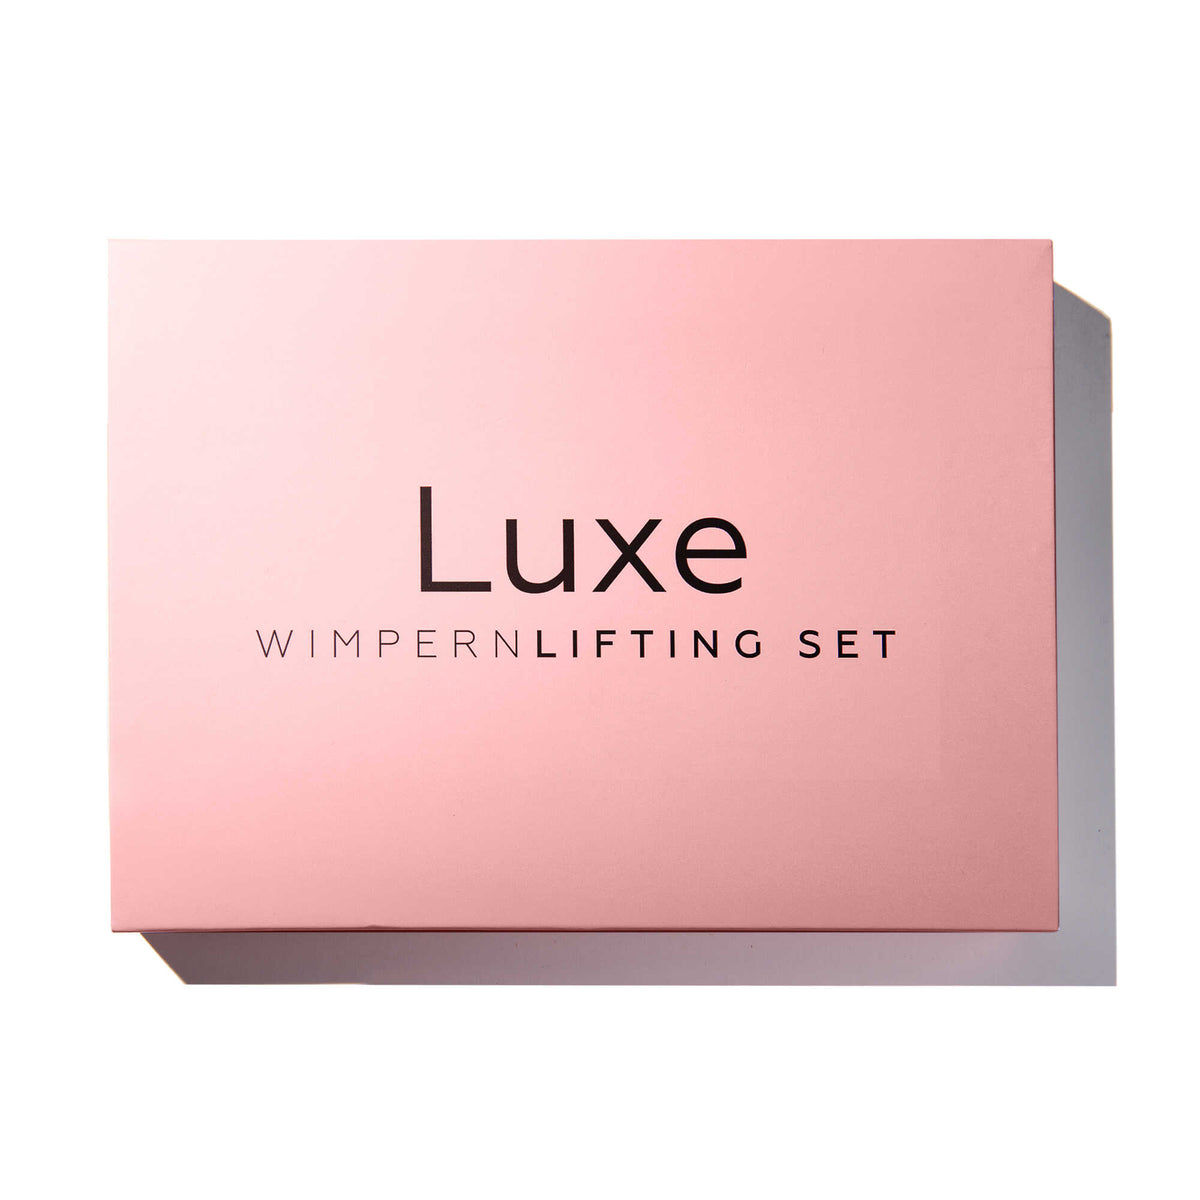 Luxe Wimperlifting Set, Luxe Cosmetics, Luxe, Luxe Lashlift Set, Luxe Wimperlifting Kit, Luxe Lashlift Kit, Luxe Wimperlifting doe het zelf, Luxe Cosmetica